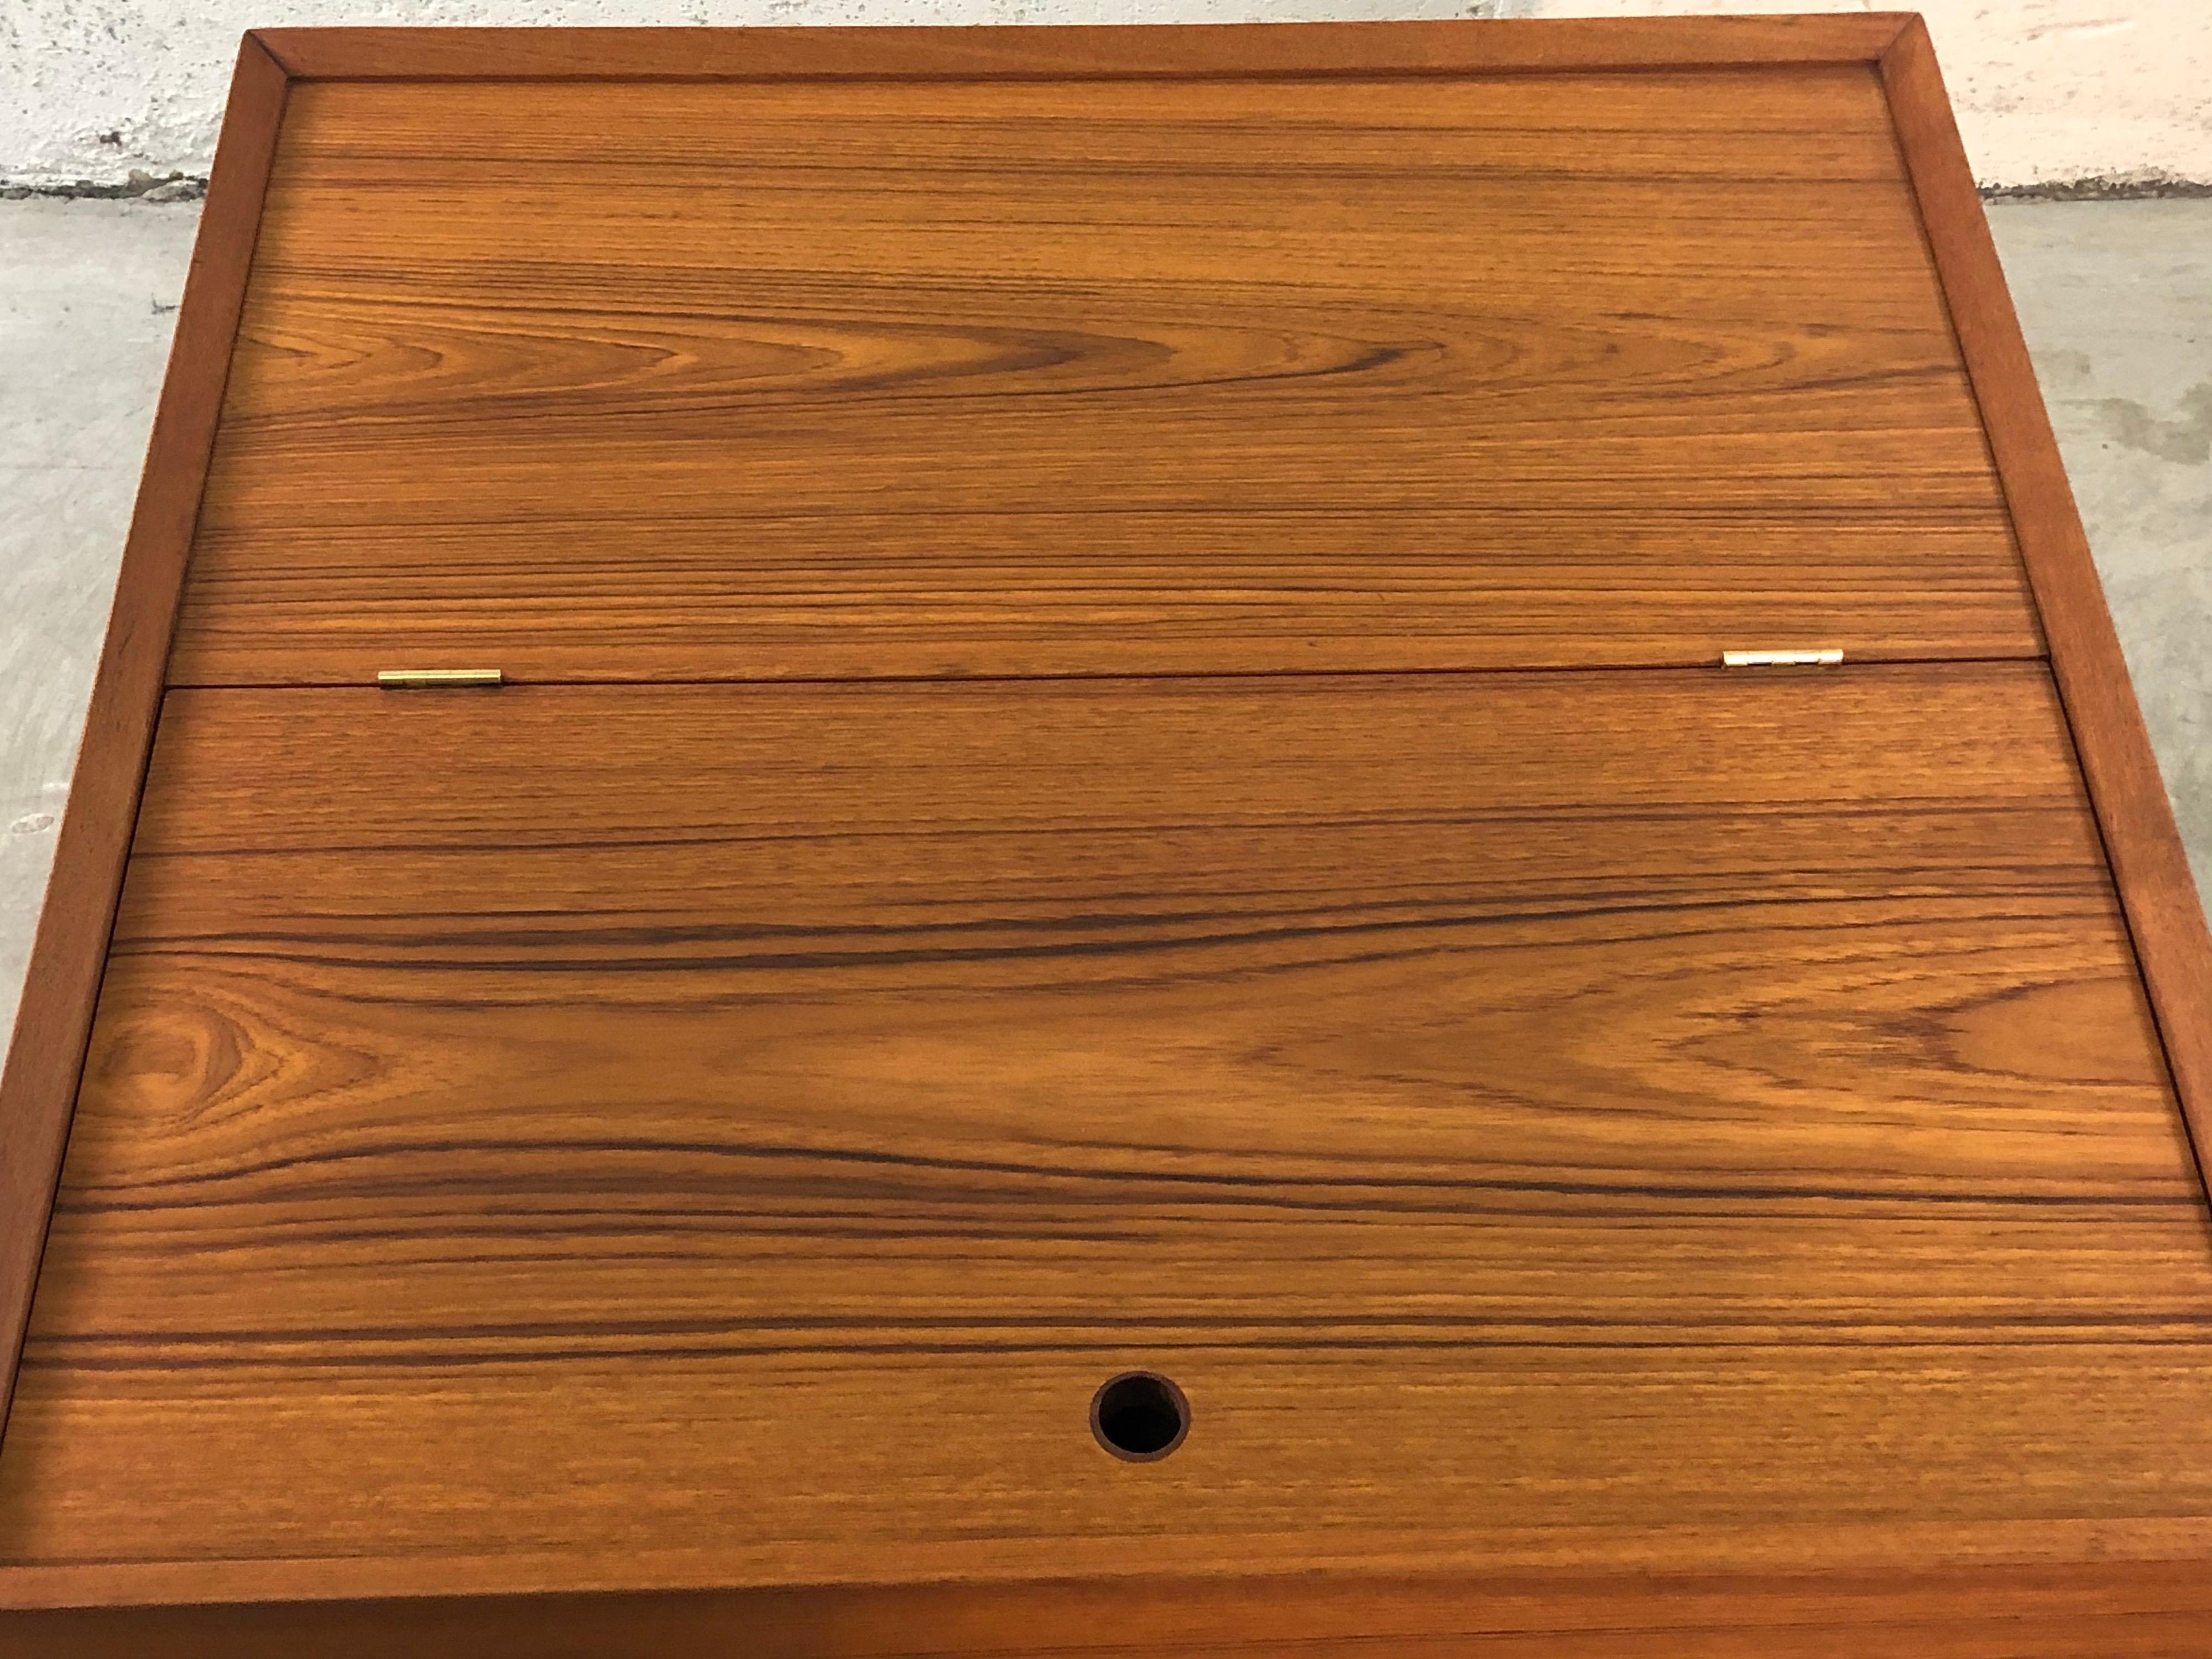 Danish Teak Square Storage Coffee Table In Good Condition For Sale In Amherst, NH